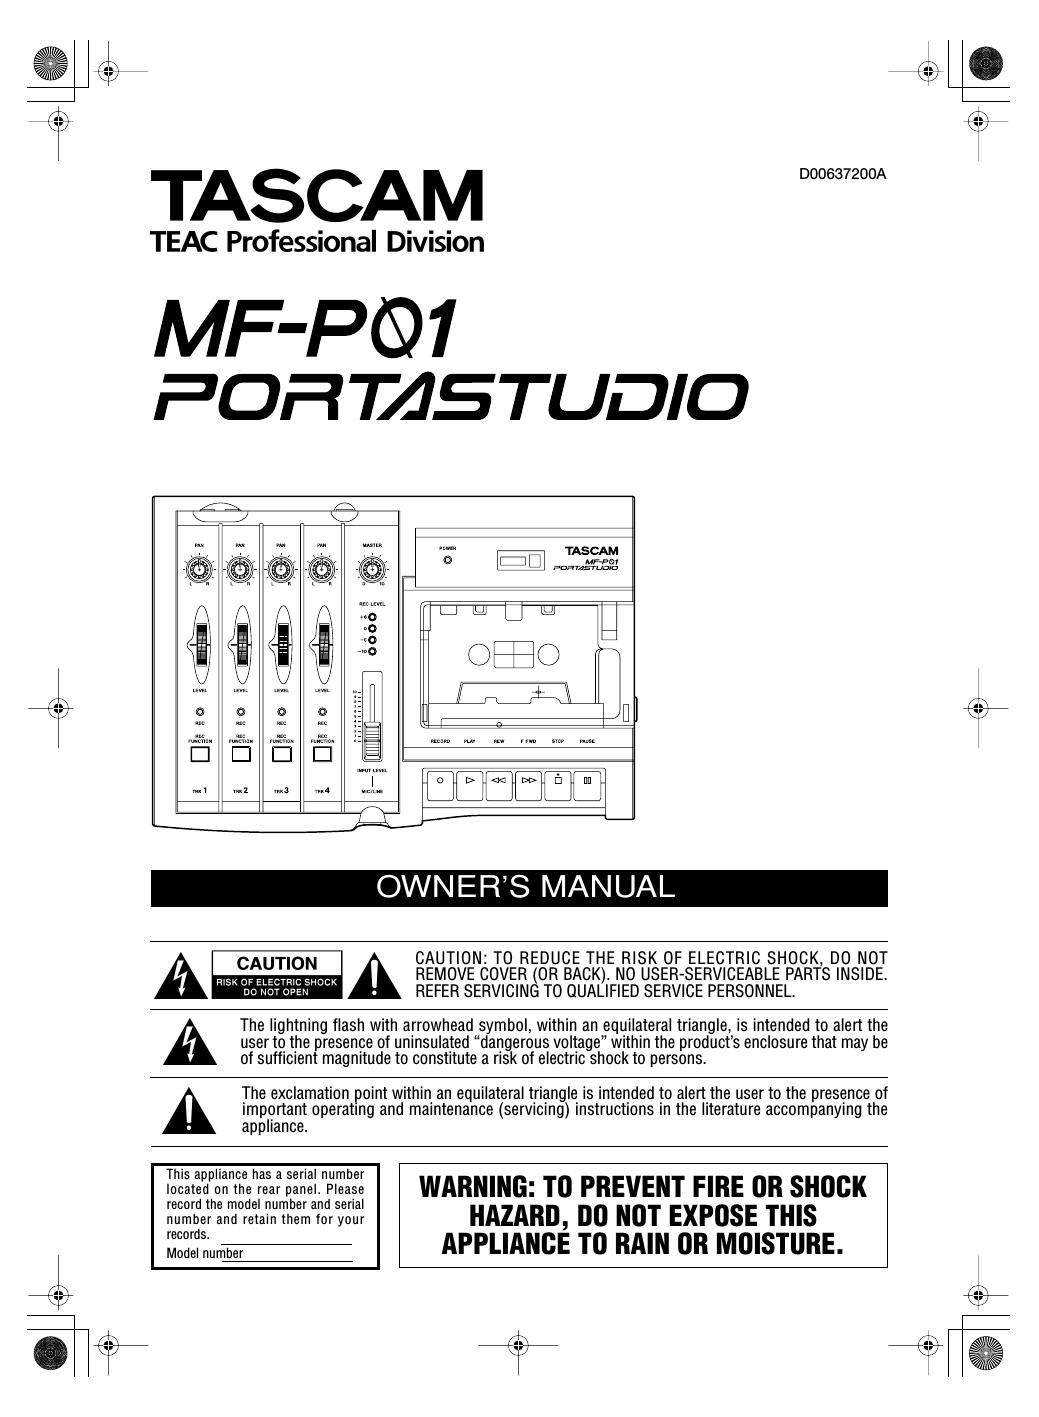 Tascam MF P01 Owners Manual